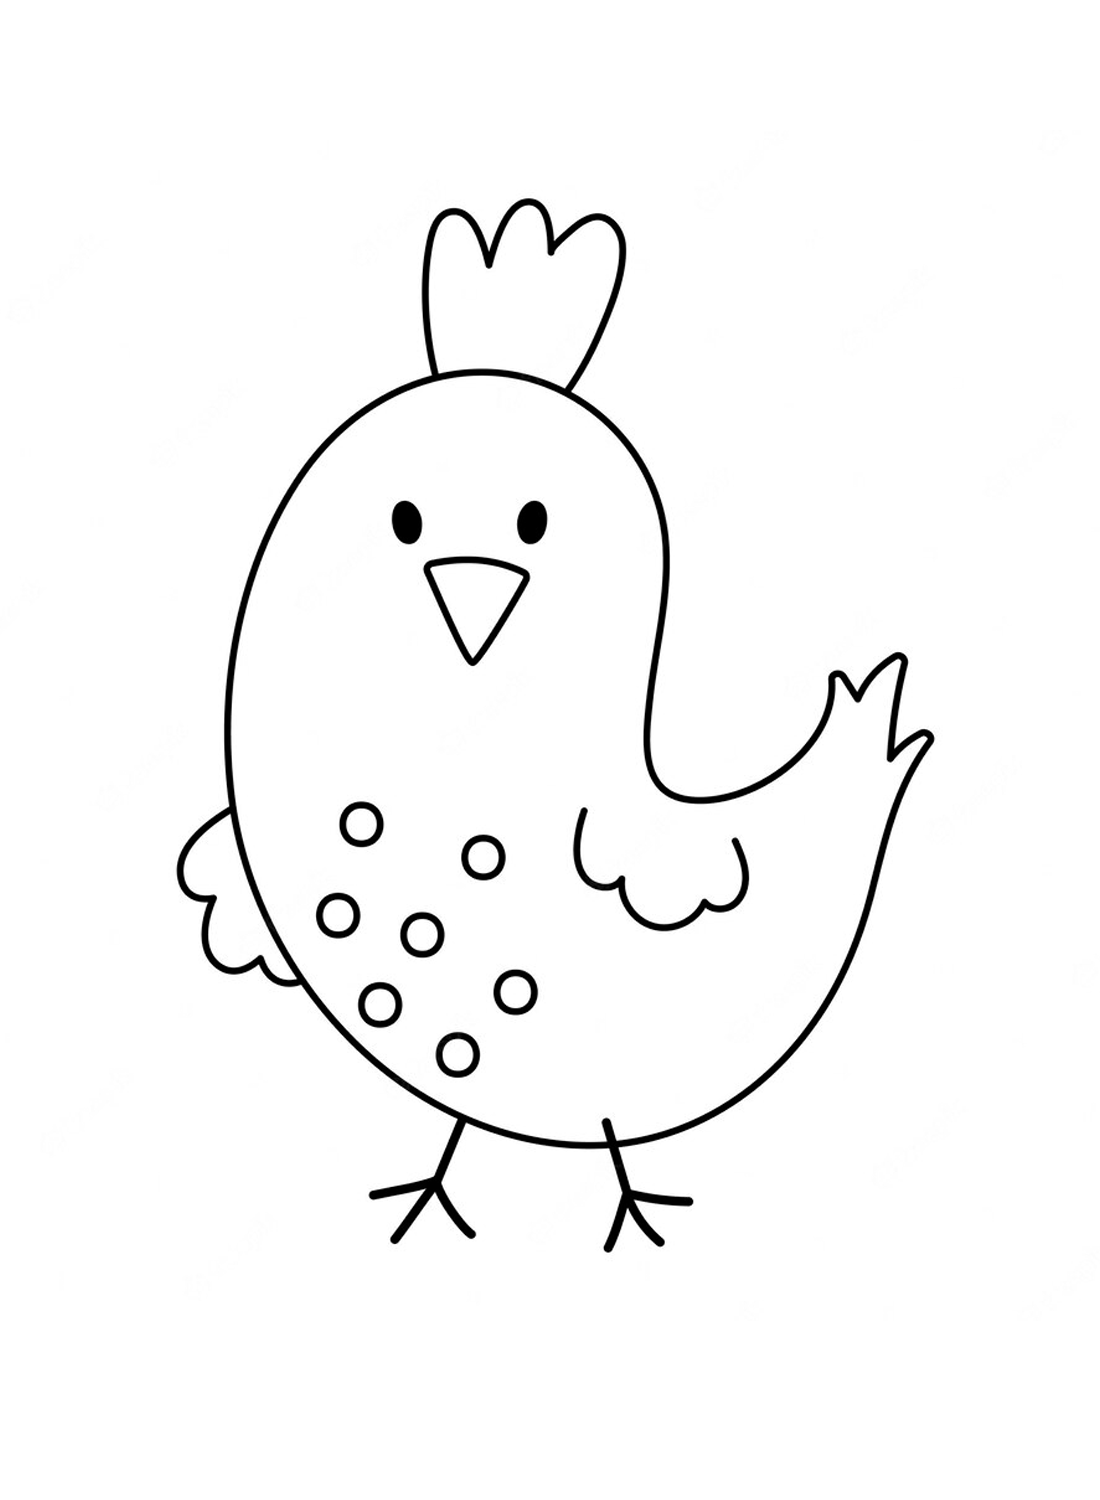 Cartoon chick Coloring Page